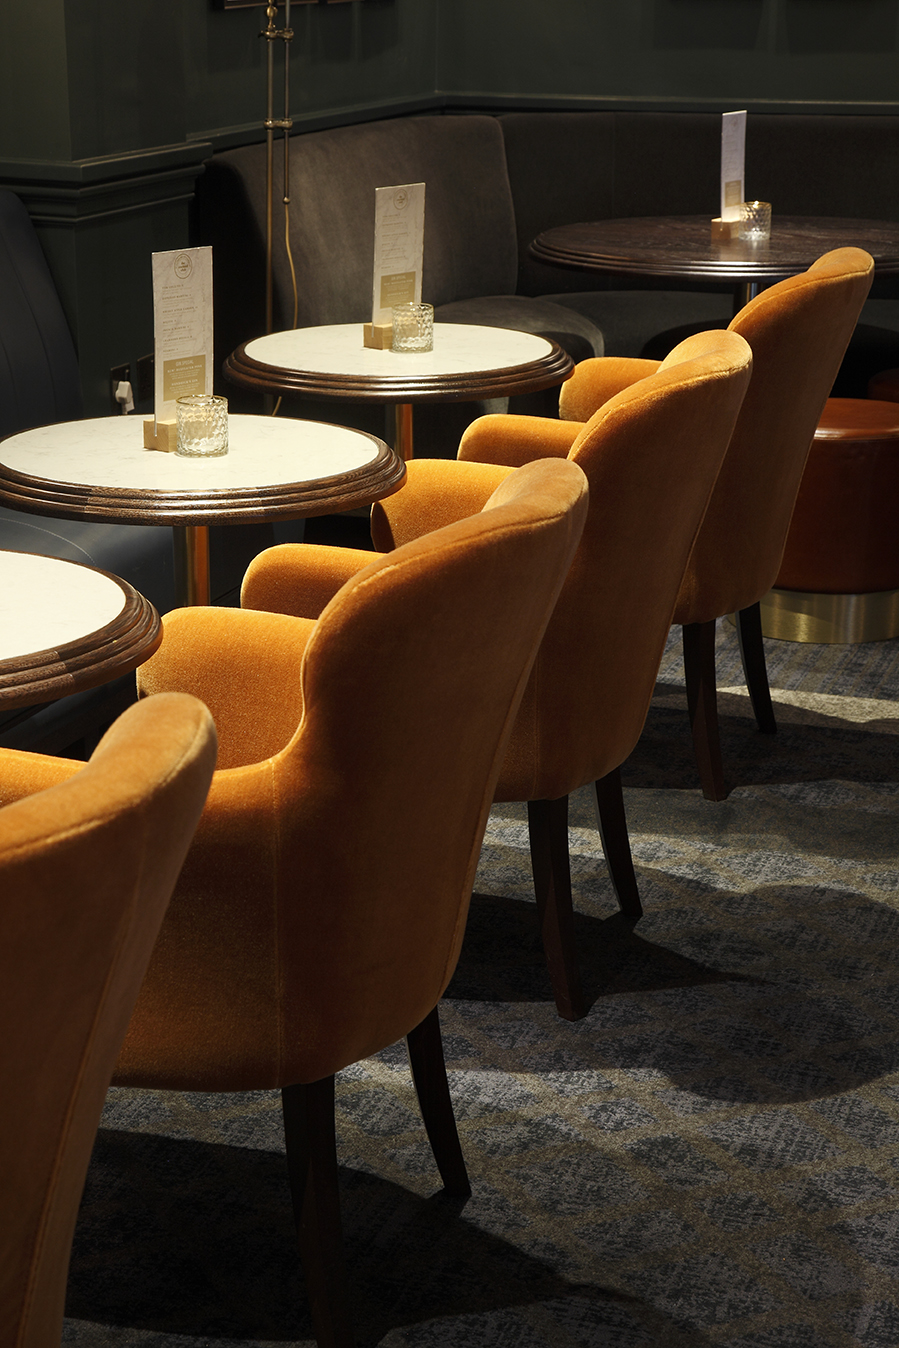 A row of orange velvet armchairs and circular white topped tables with menus on in a bar with moody lighting